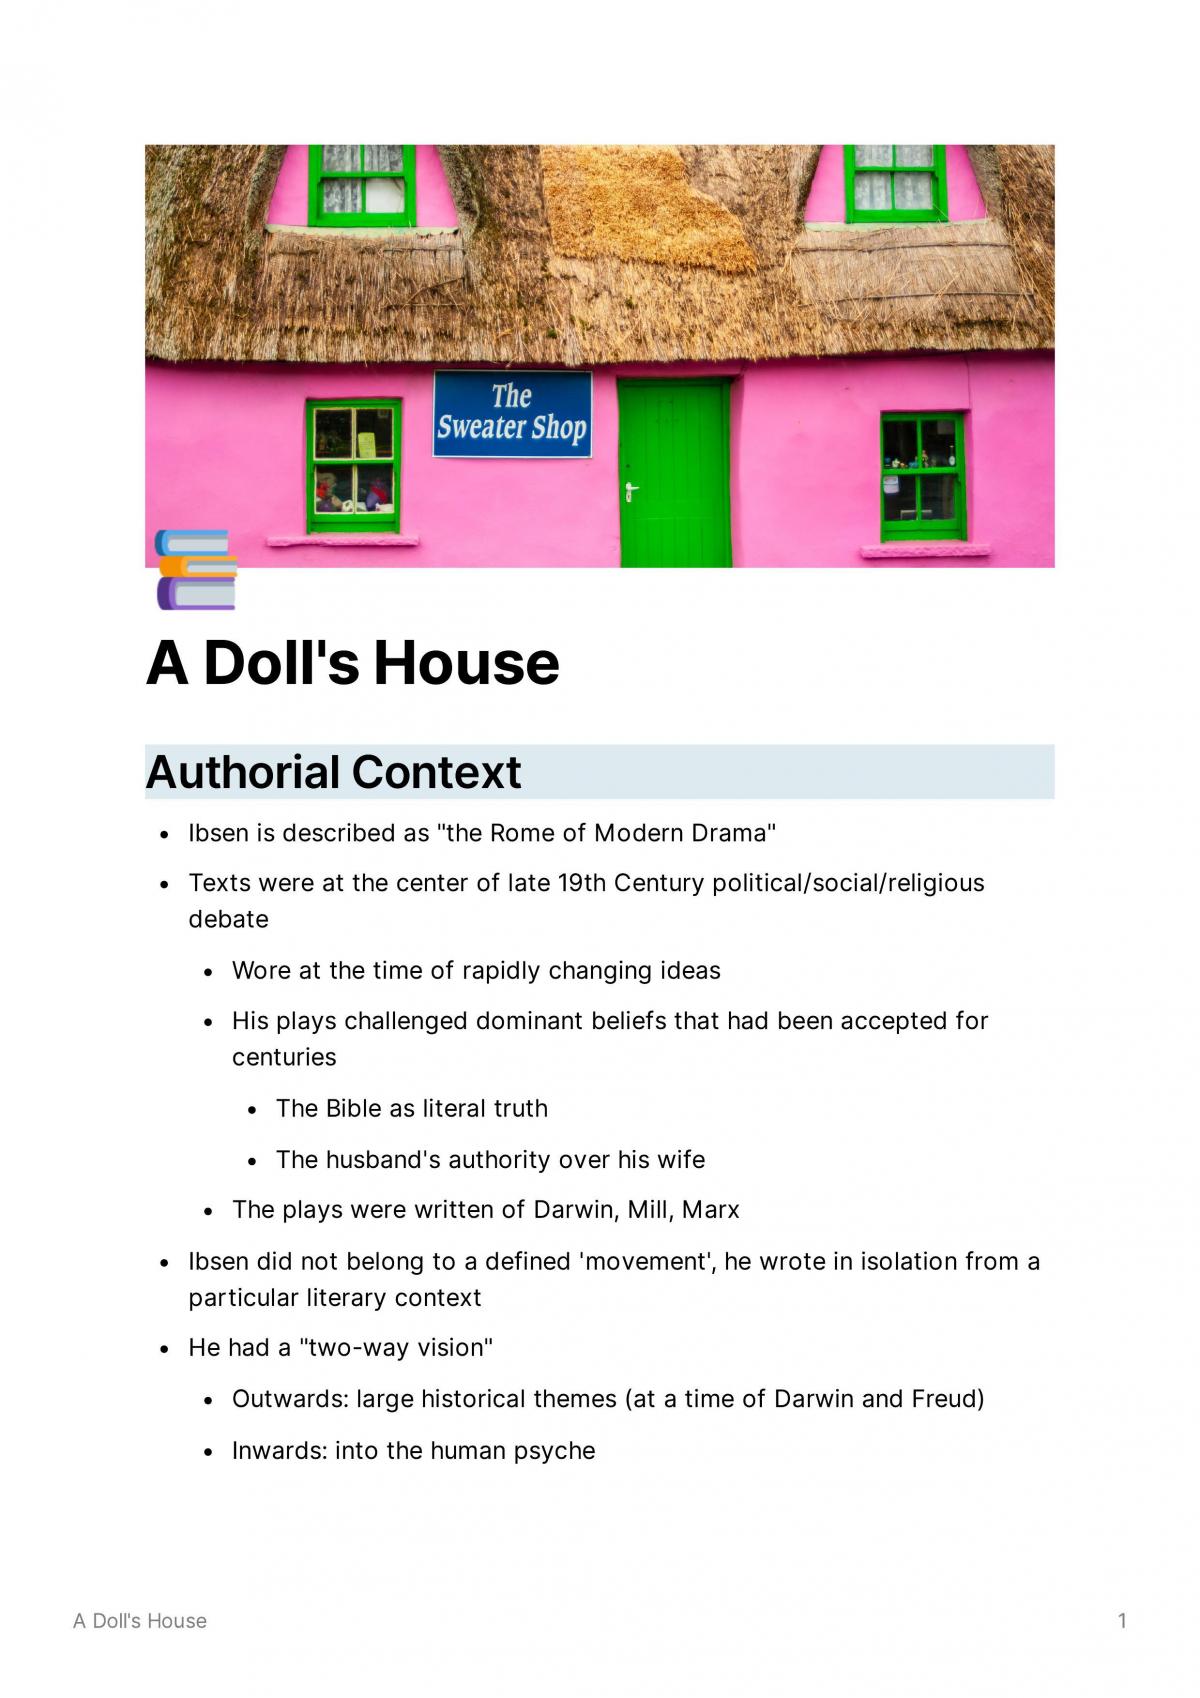 essay questions about a doll's house